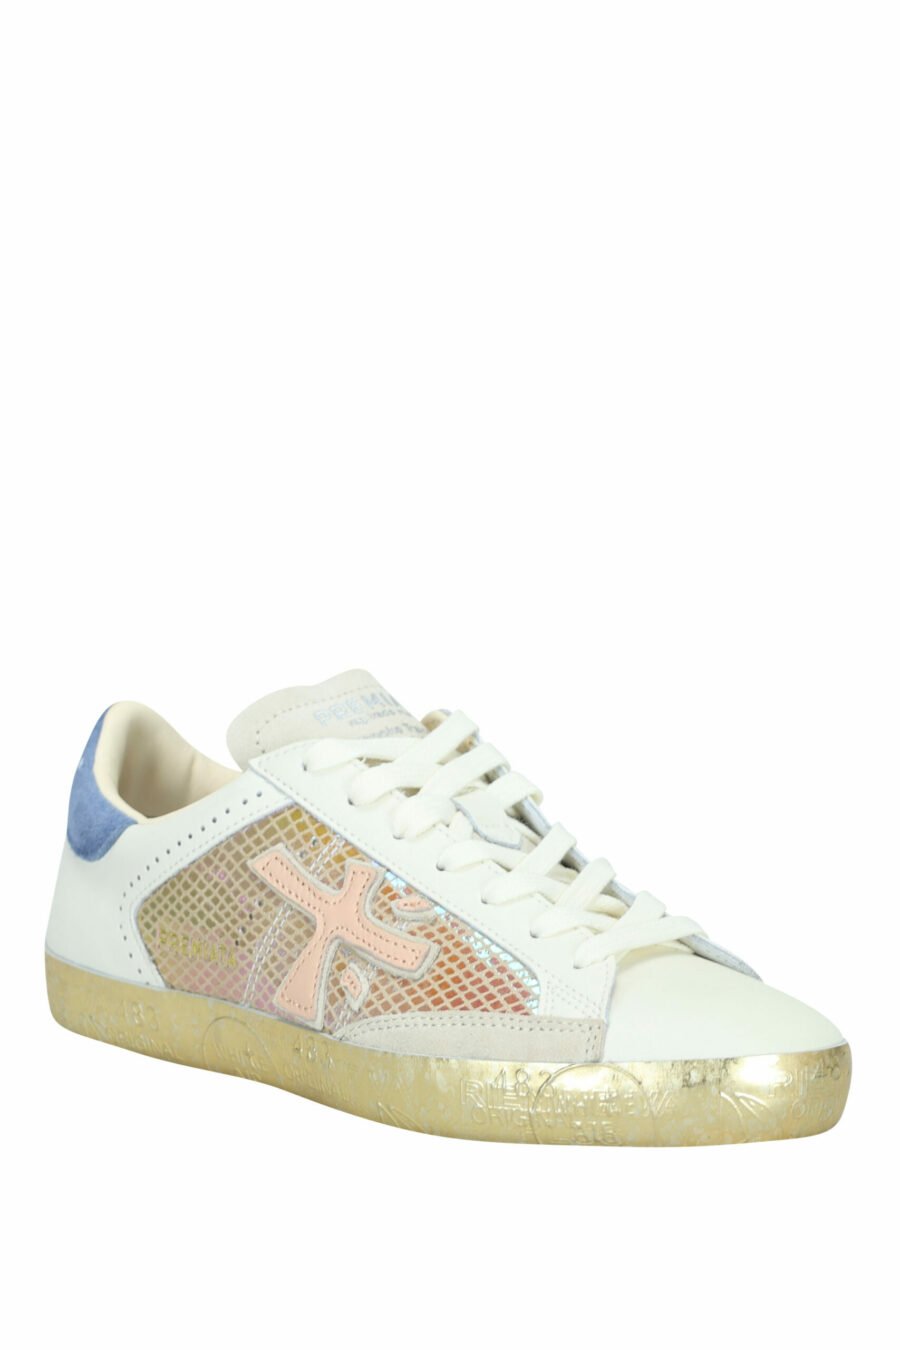 White multicoloured trainers with gold sole "Stevend 6666" - 8053680396552 1 scaled